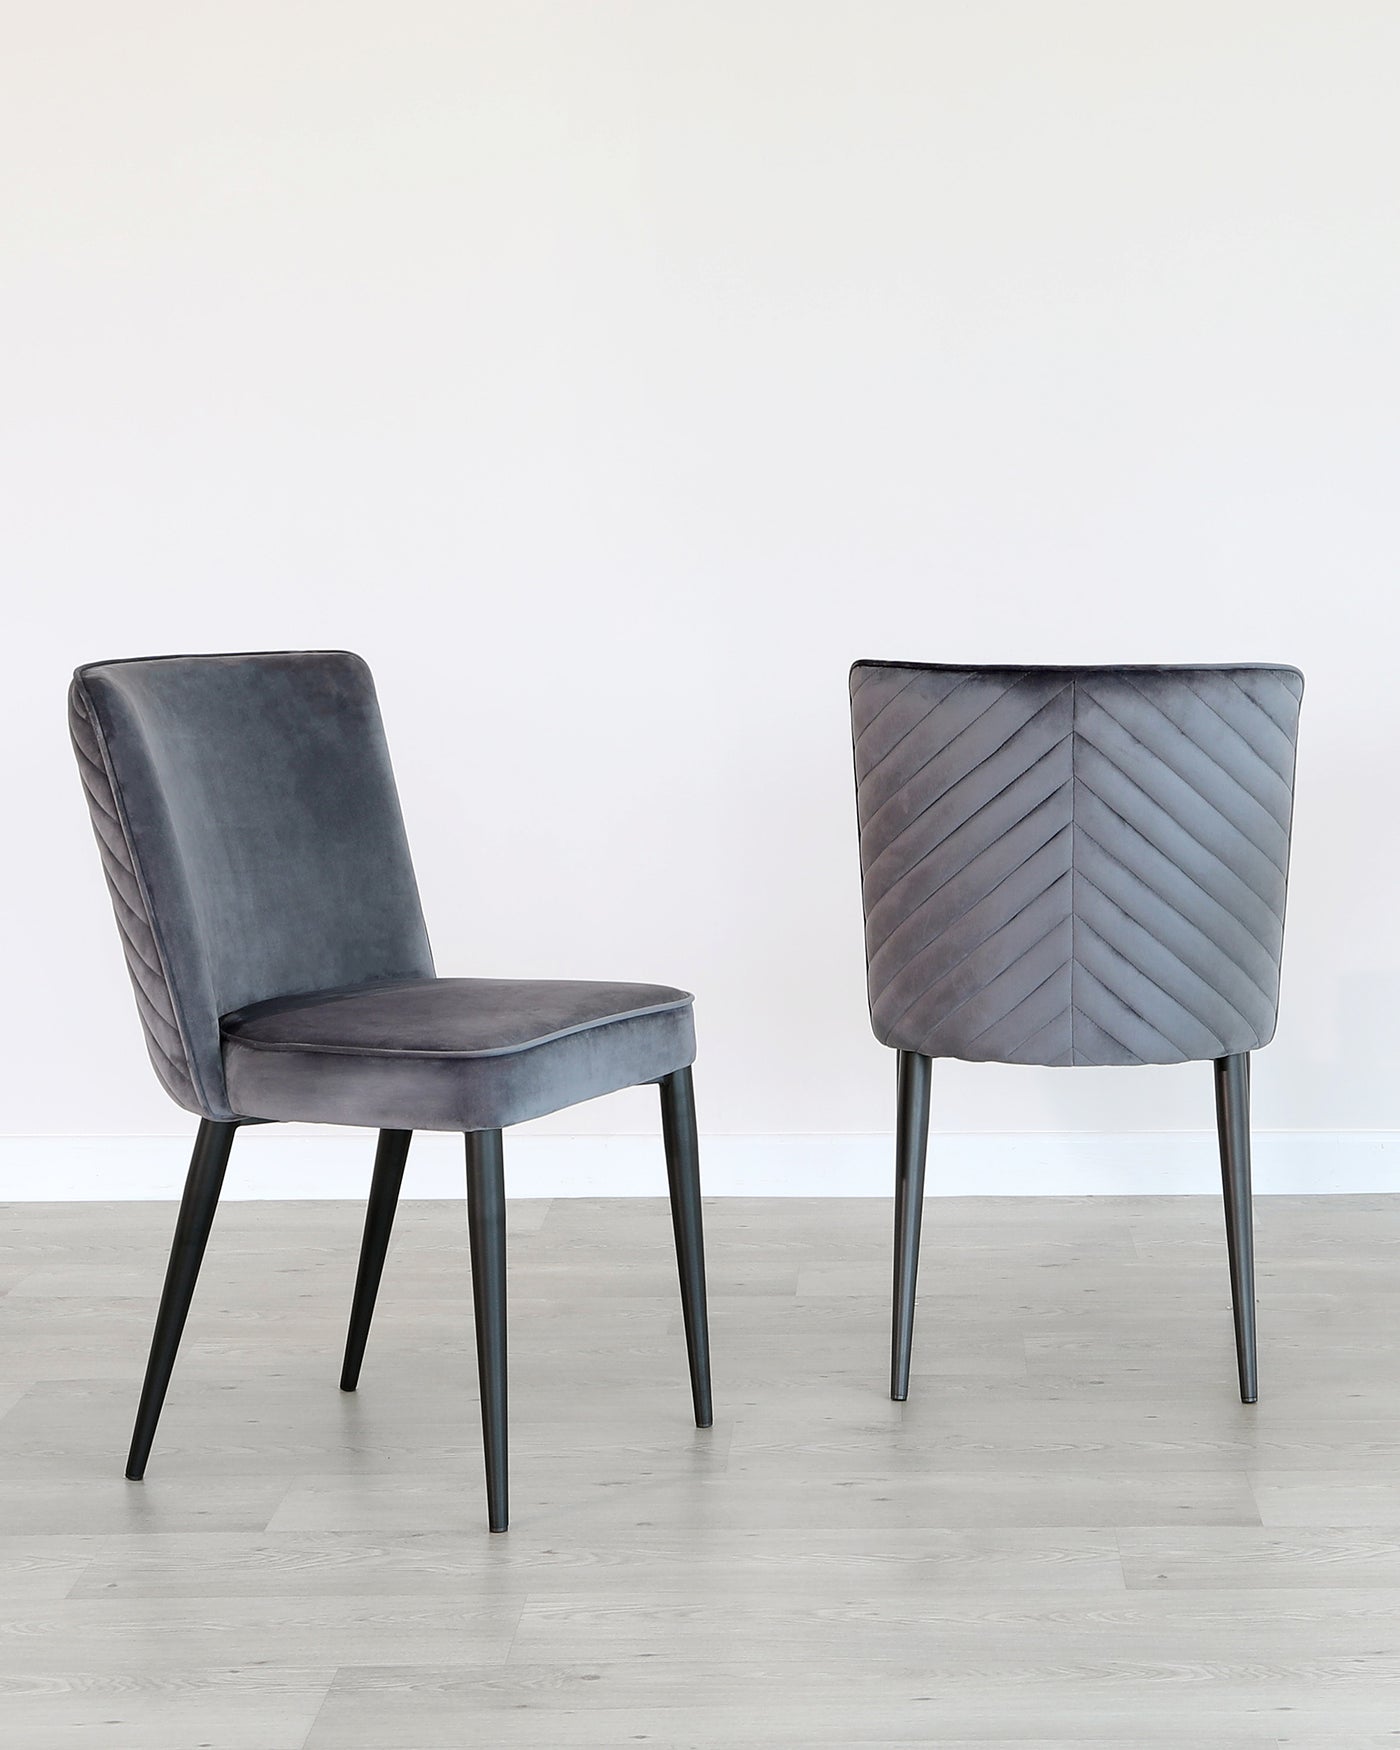 A pair of contemporary dining chairs with a luxurious grey velvet upholstery. The chairs feature a simple yet elegant design with a quilted backrest, displaying a chevron pattern, and sleek black metal legs. The chairs are positioned on a light wooden floor against a white wall, presenting a modern minimalist aesthetic.